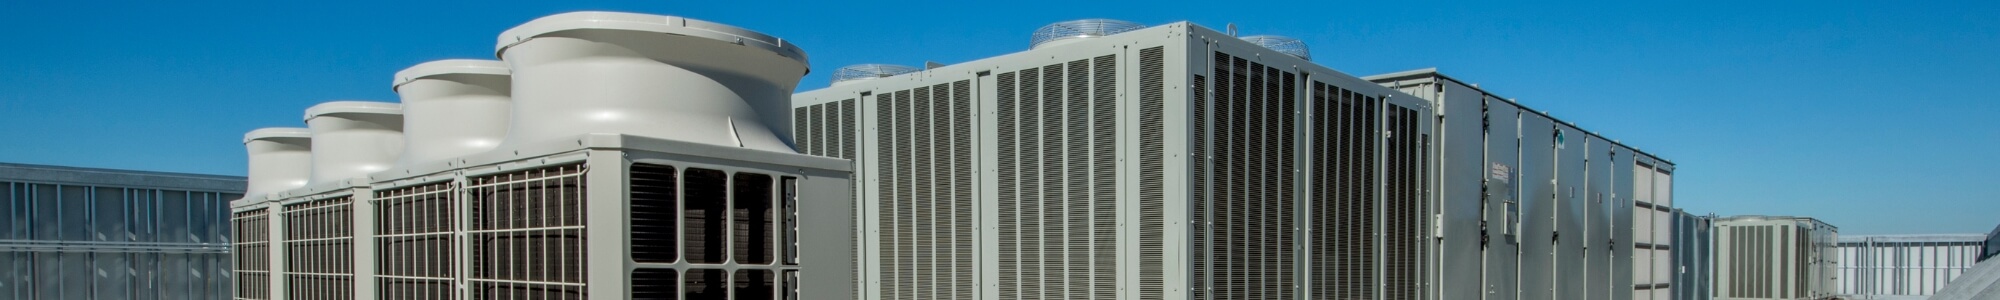 HVAC services in Newmarket